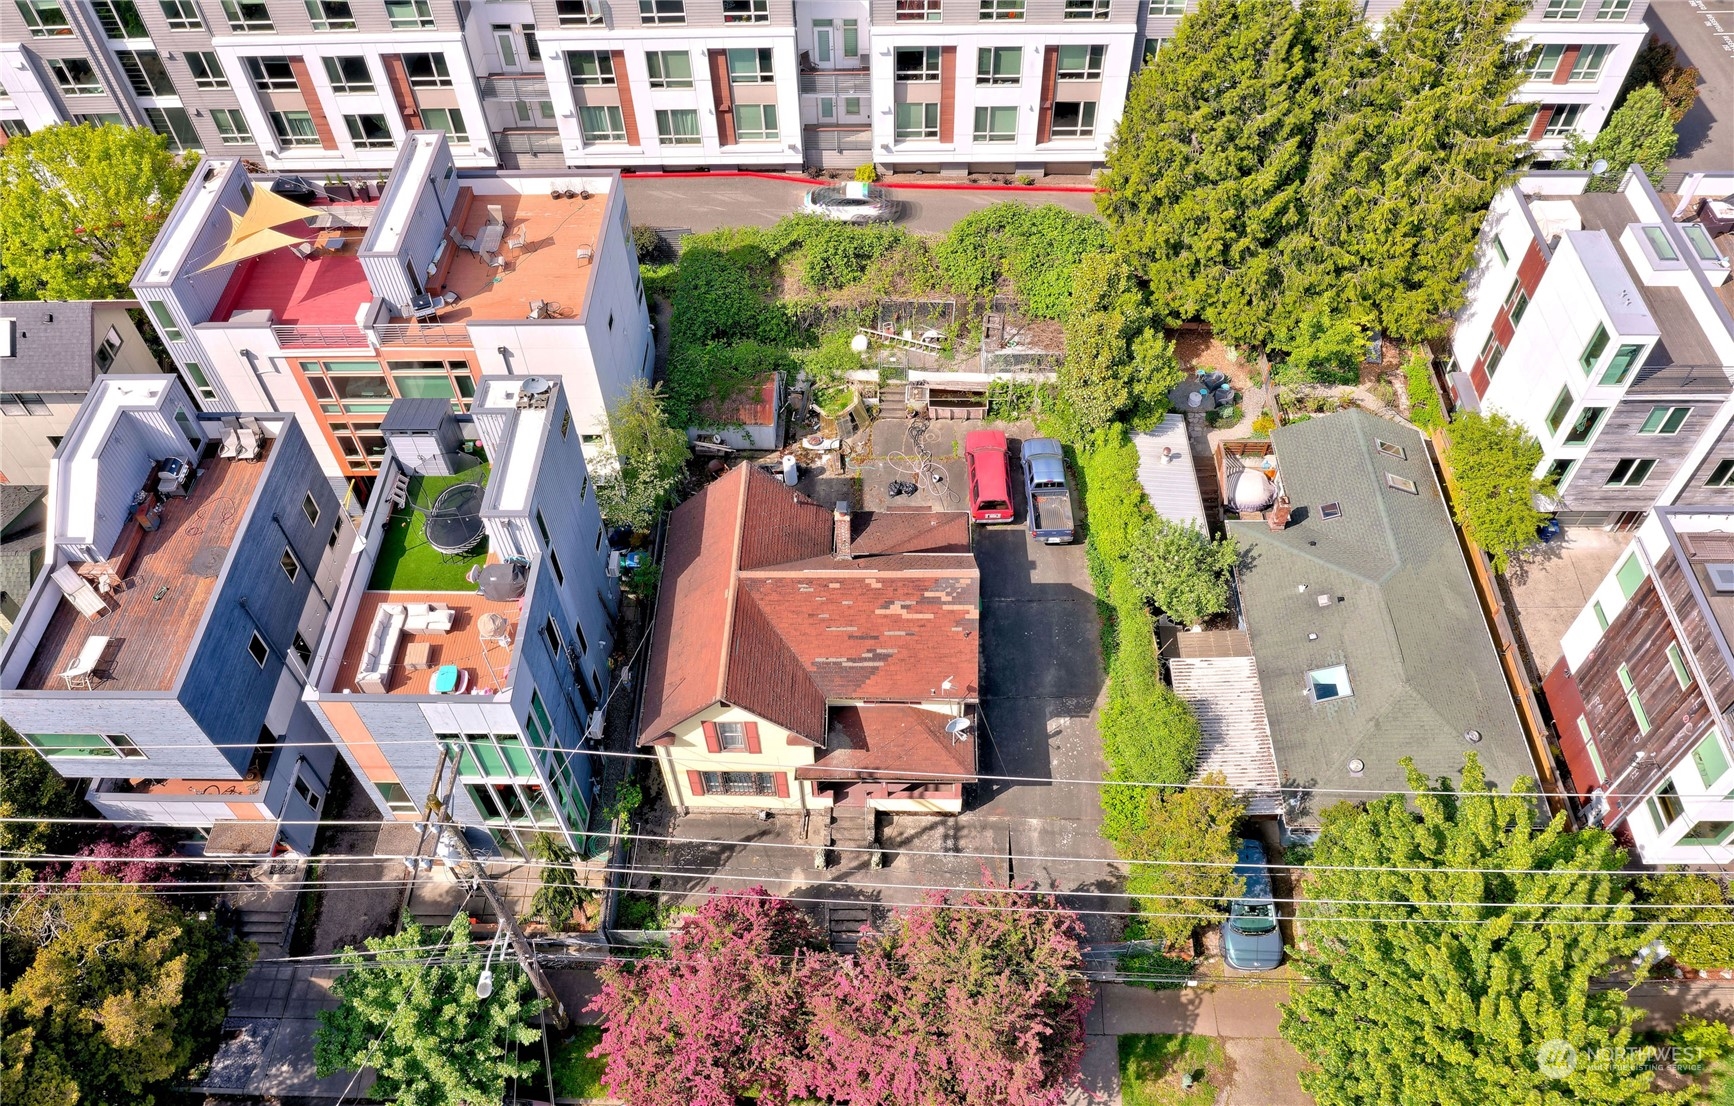 an aerial view of multi story residential apartment building with yard and outdoor seating